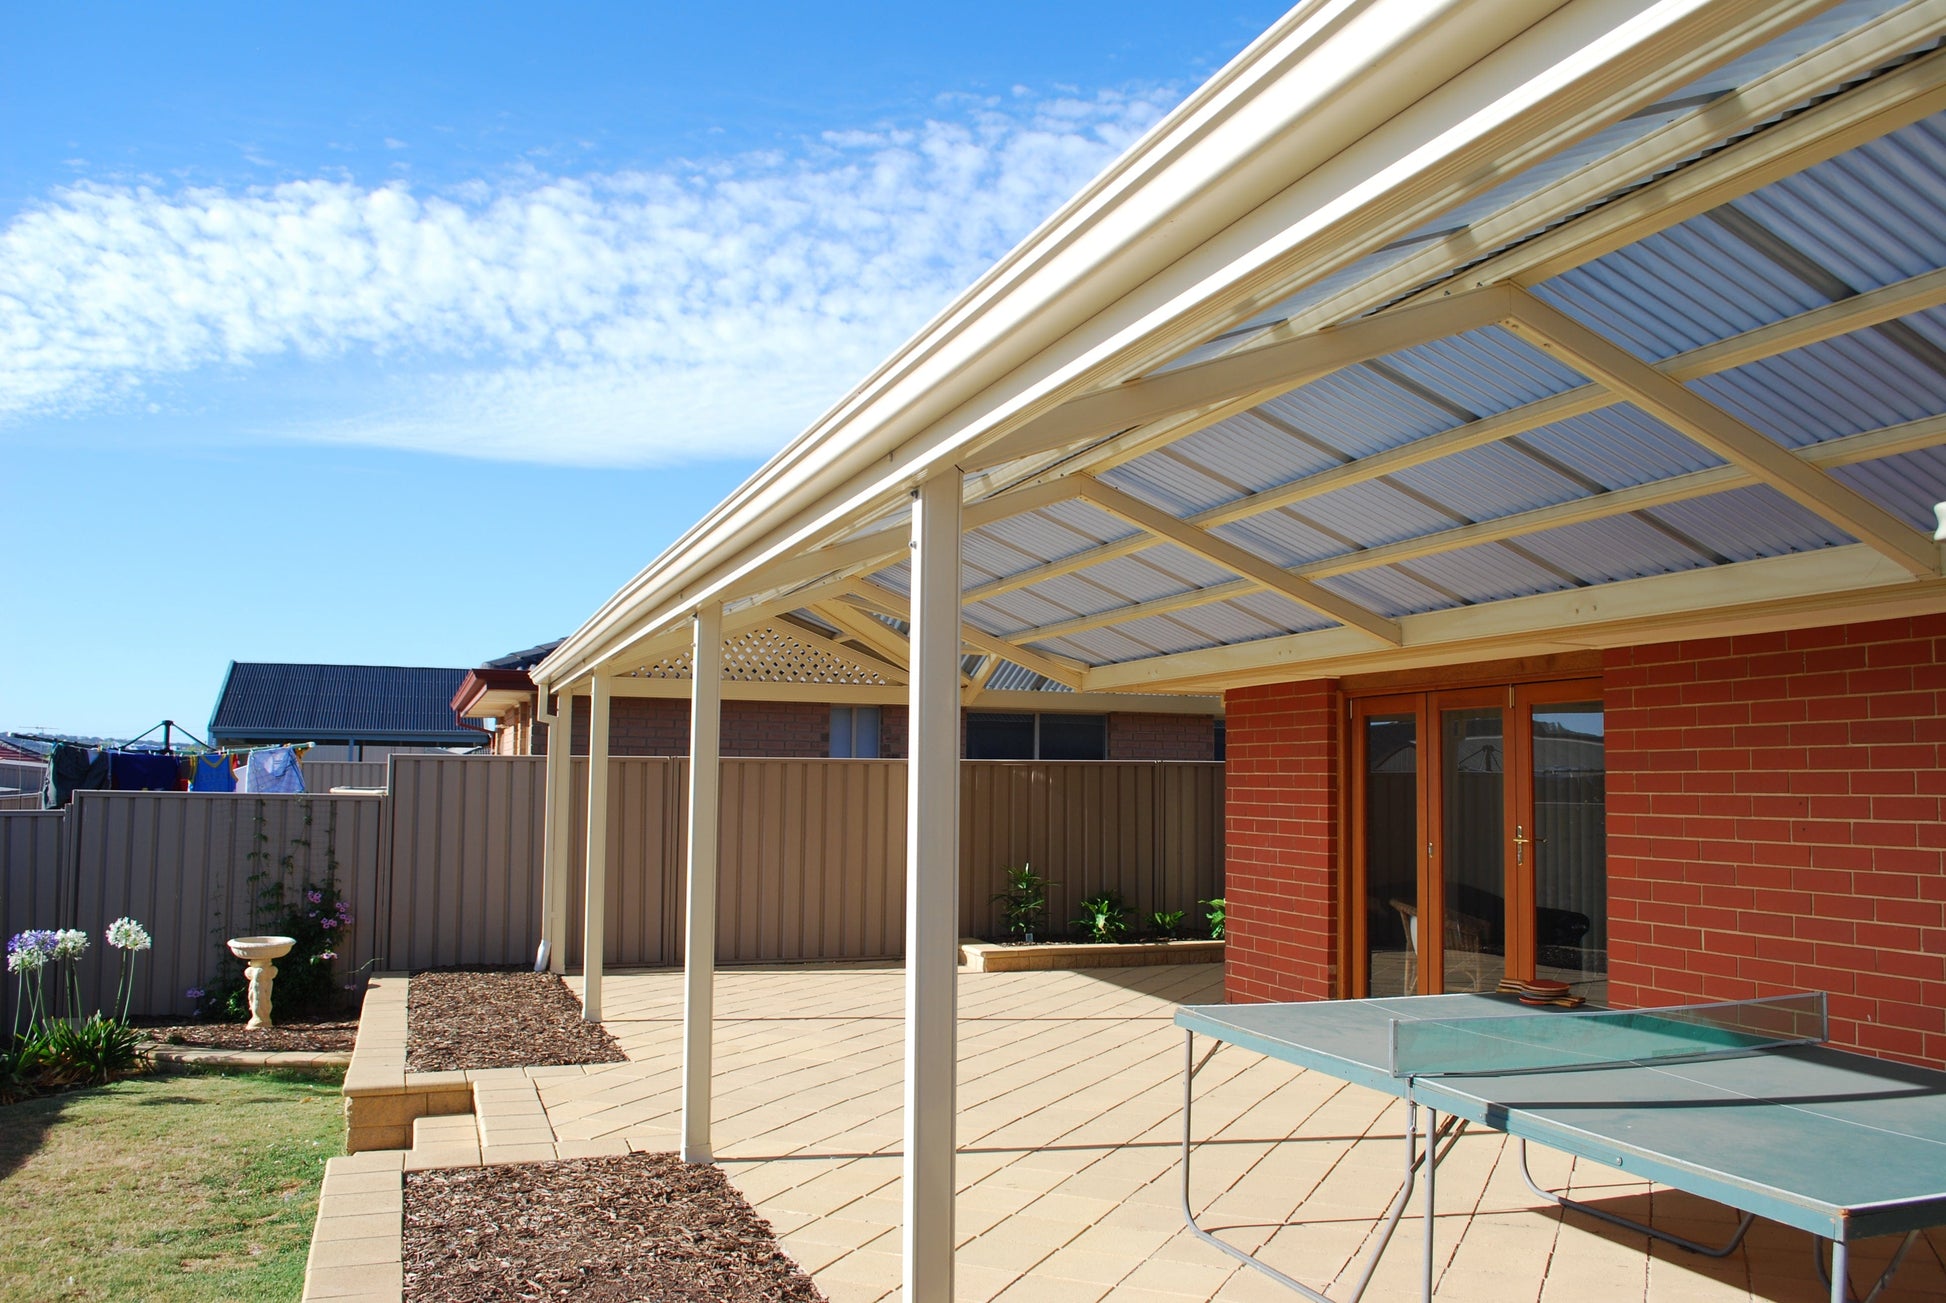 Insulated Gable Patio - 8m x 6m- Supply & Install QHI National